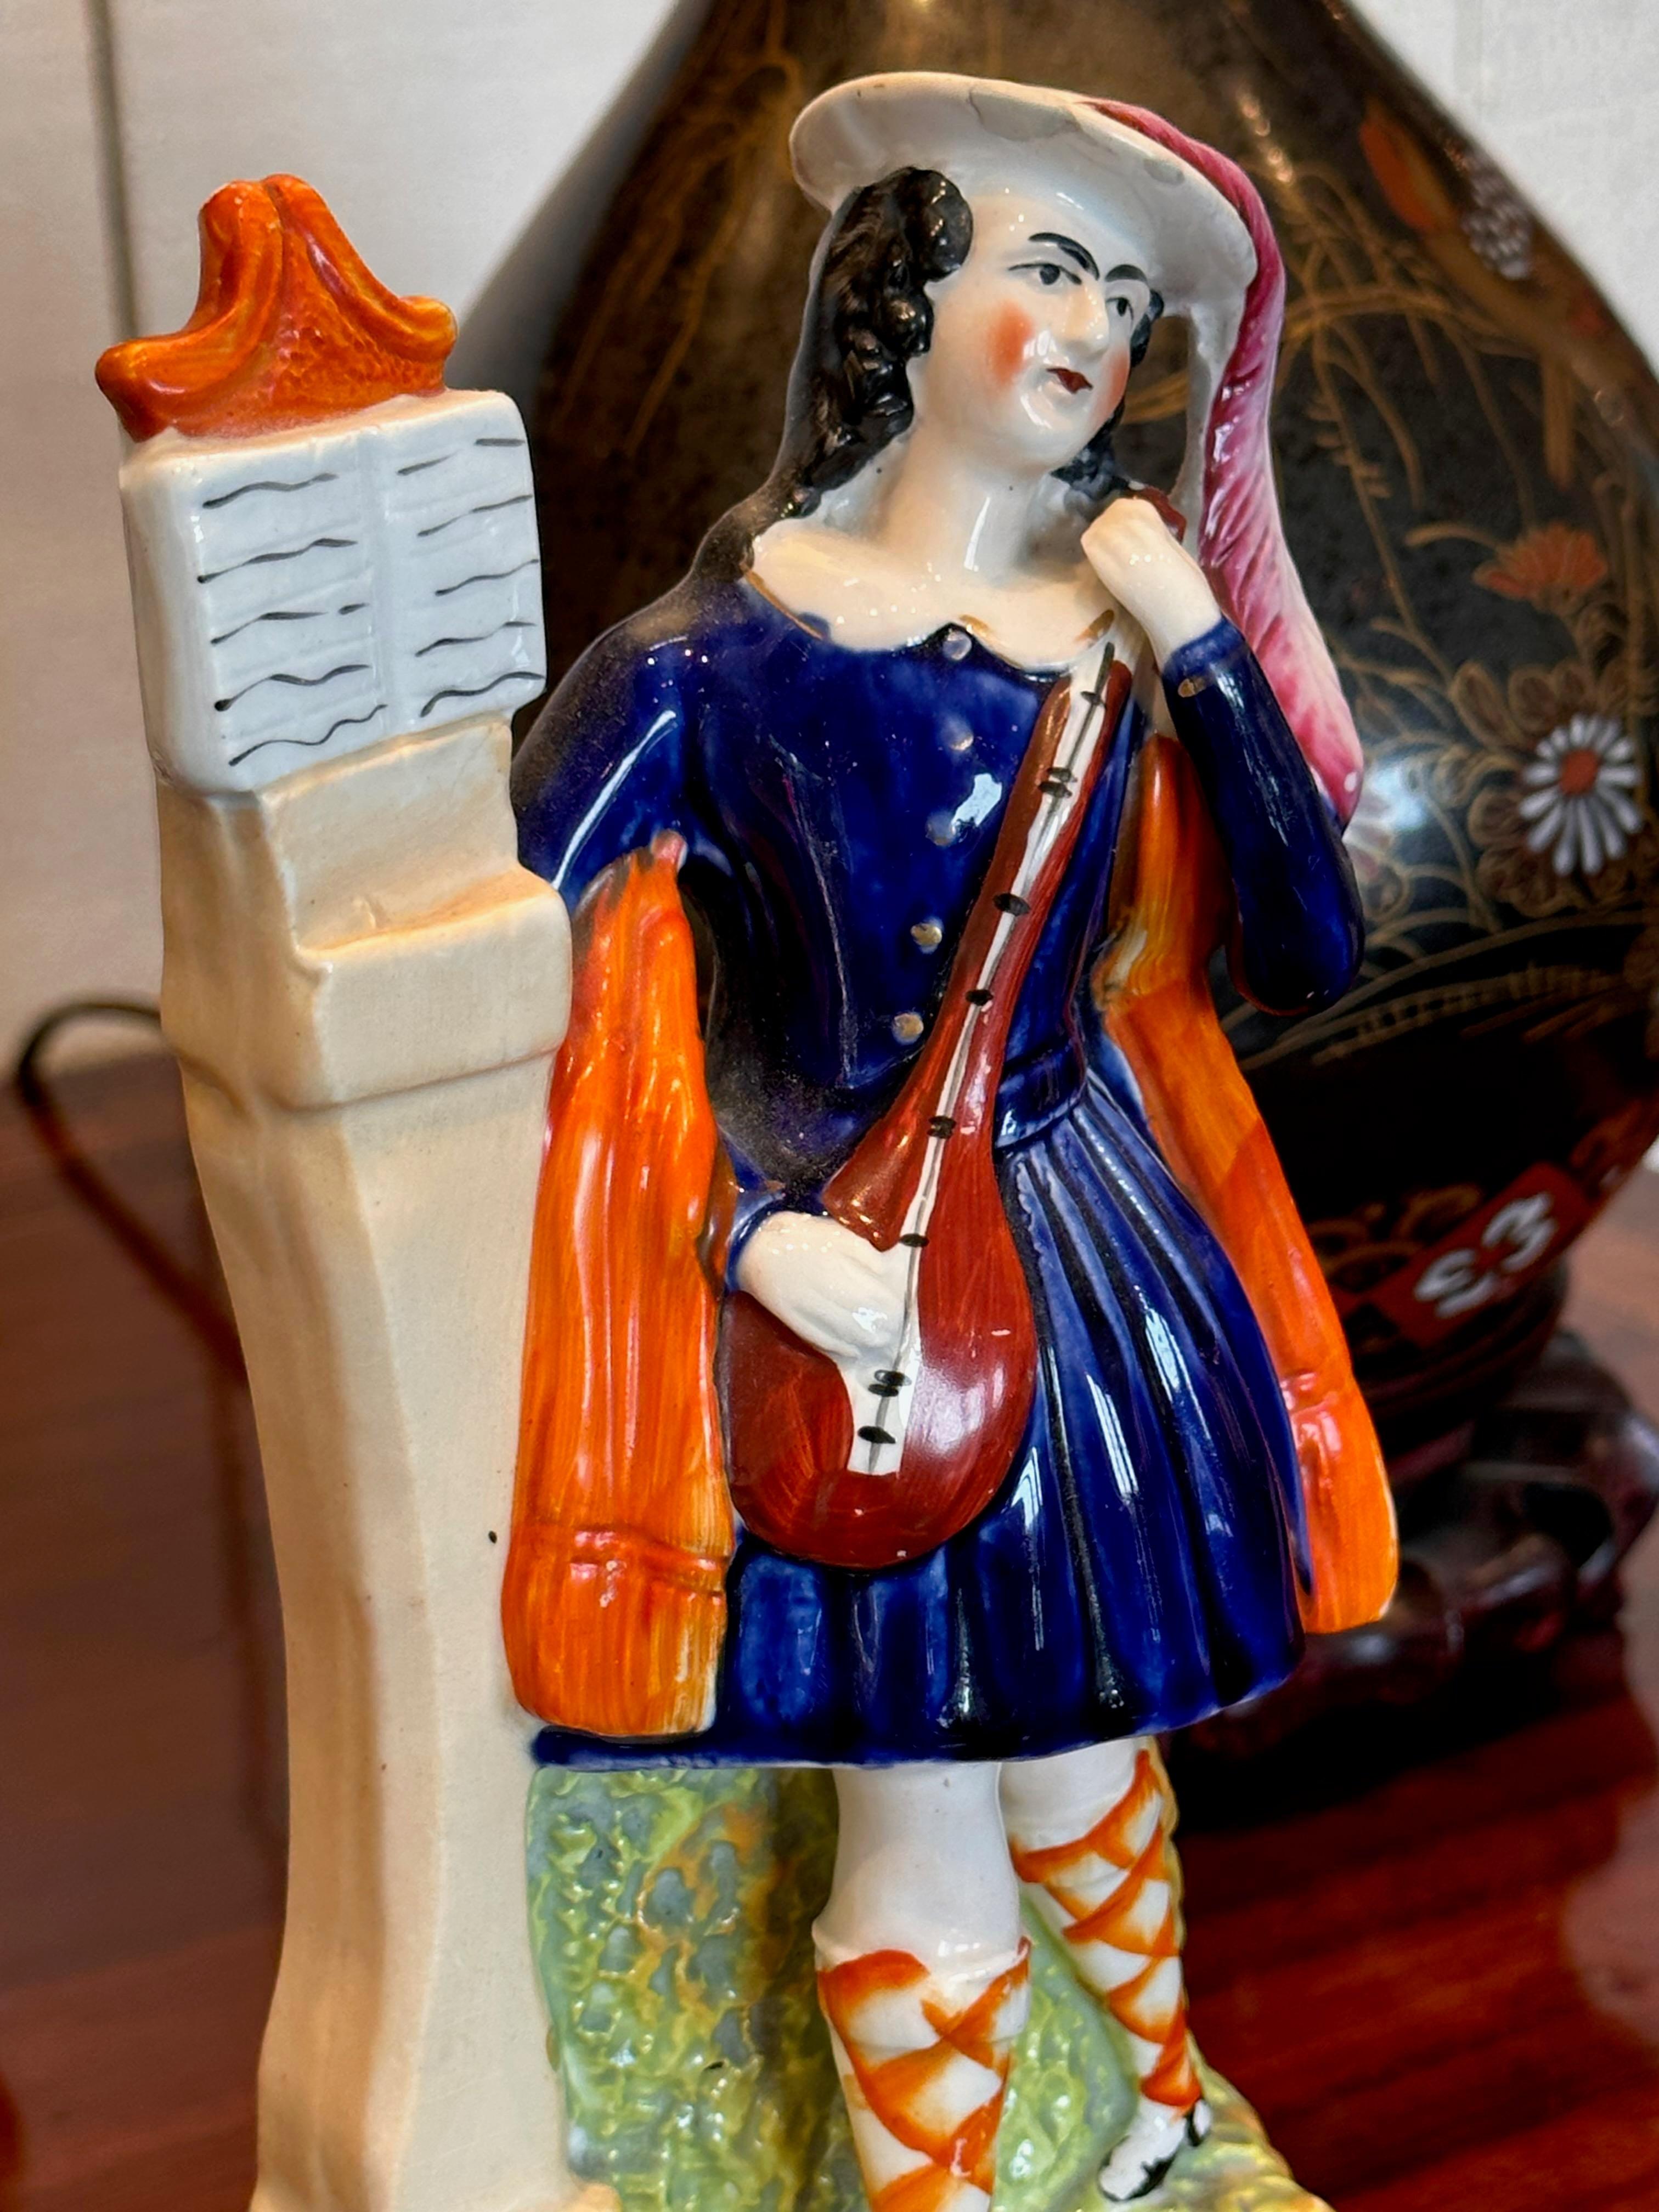 Nice color. A Scottish musician figurine. Made in the Mid 19th Century